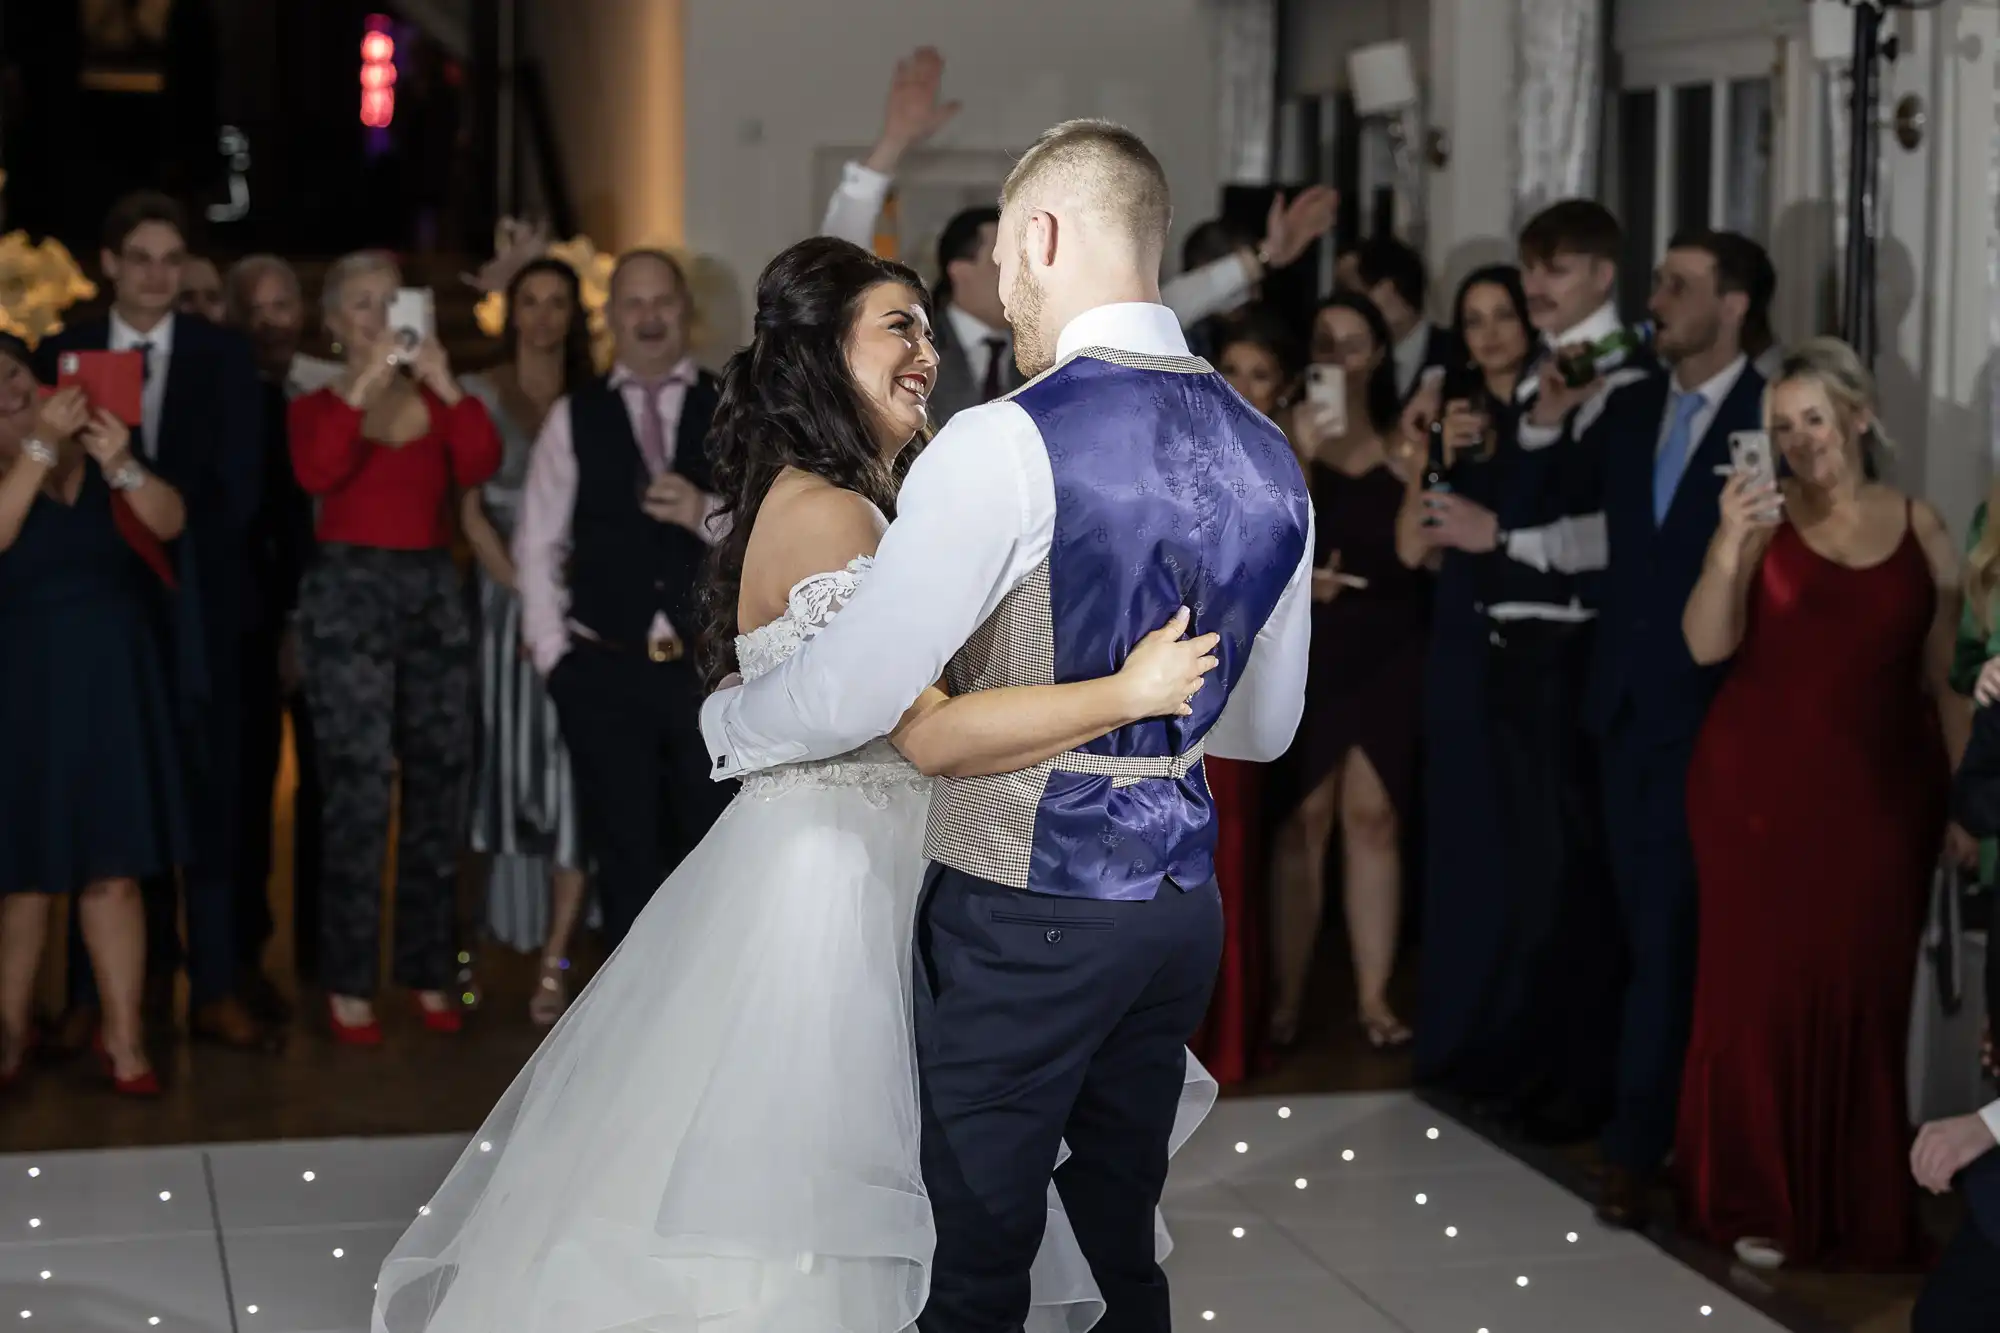 A newlywed couple dances on a white-lit floor while guests watch and take photos at their wedding reception.